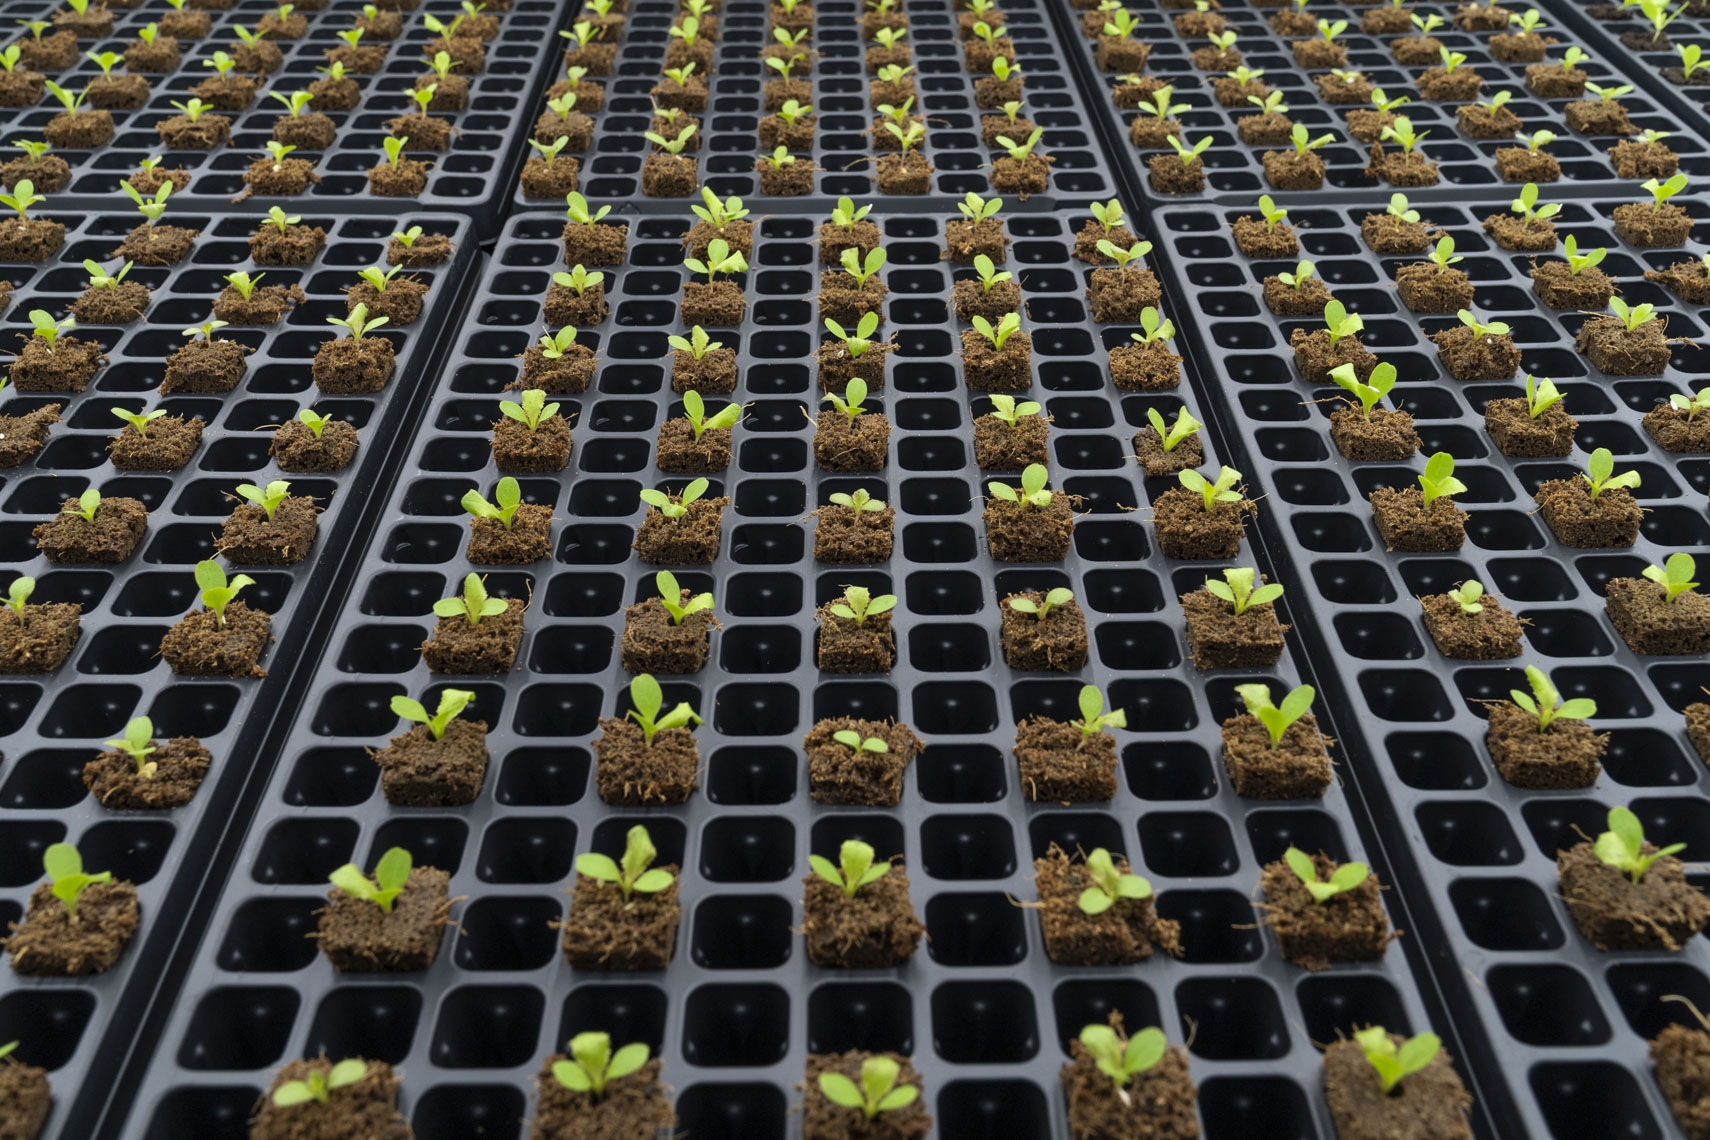 Rows of lettuce seedlings at Beanstalk Farms, an automated indoor farming operation in suburban Washington DC.